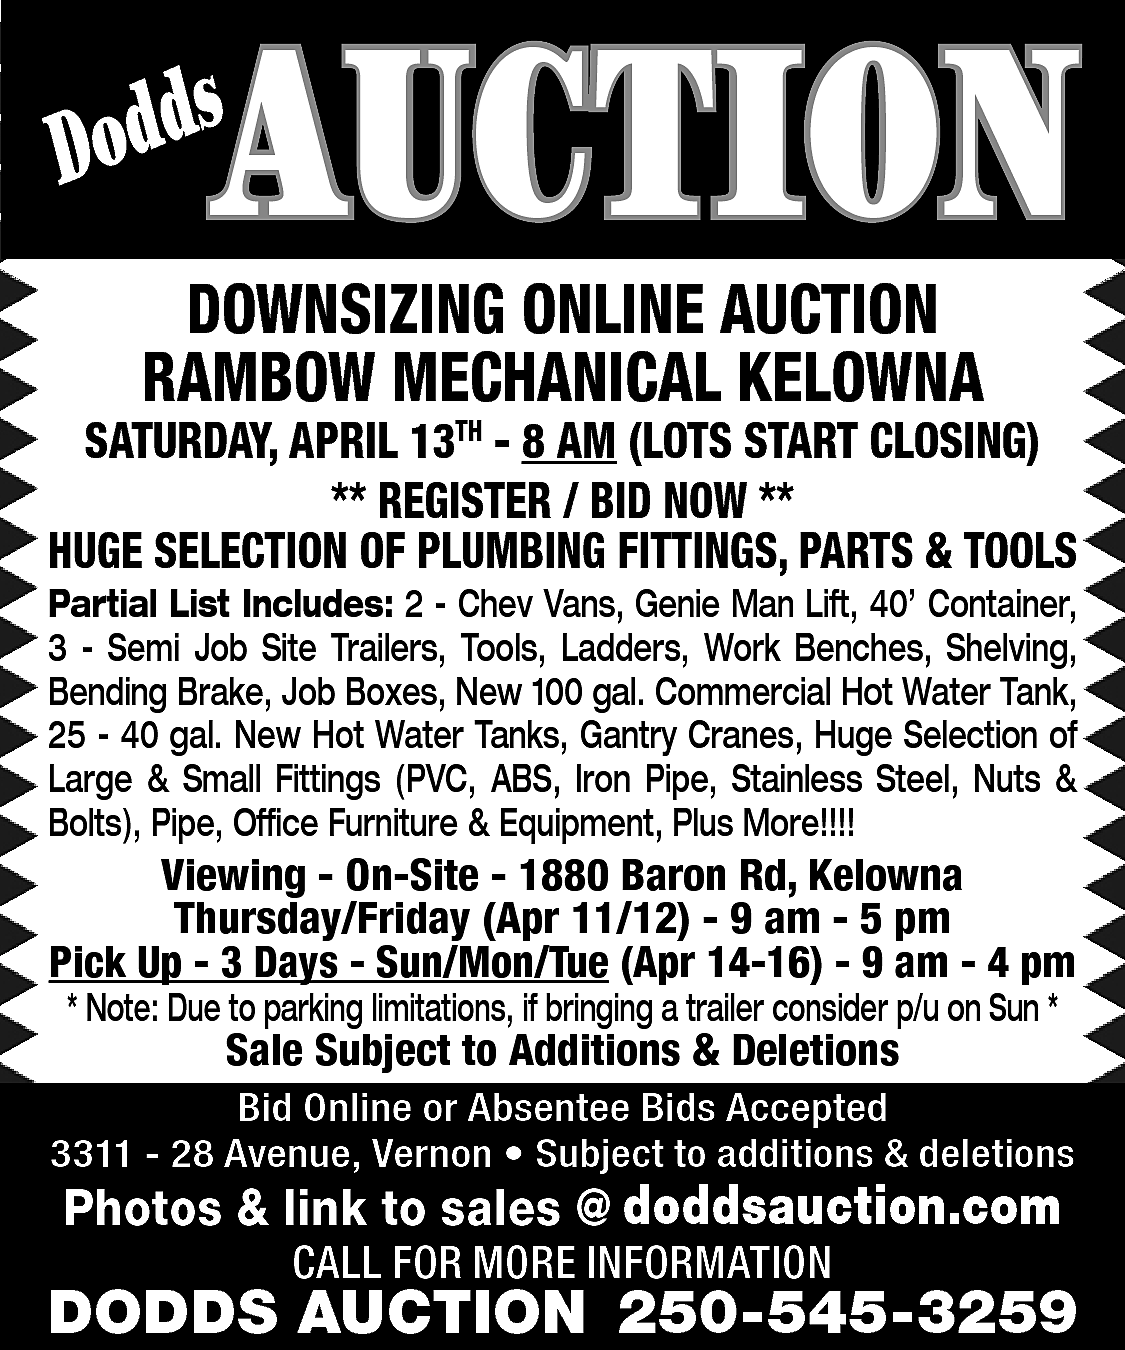 AUCTION <br> <br>s <br>Dodd <br>  AUCTION    s  Dodd    DOWNSIZING ONLINE AUCTION  RAMBOW MECHANICAL KELOWNA    SATURDAY, APRIL 13TH - 8 AM (LOTS START CLOSING)  ** REGISTER / BID NOW **  HUGE SELECTION OF PLUMBING FITTINGS, PARTS & TOOLS    Partial List Includes: 2 - Chev Vans, Genie Man Lift, 40’ Container,  3 - Semi Job Site Trailers, Tools, Ladders, Work Benches, Shelving,  Bending Brake, Job Boxes, New 100 gal. Commercial Hot Water Tank,  25 - 40 gal. New Hot Water Tanks, Gantry Cranes, Huge Selection of  Large & Small Fittings (PVC, ABS, Iron Pipe, Stainless Steel, Nuts &  Bolts), Pipe, Office Furniture & Equipment, Plus More!!!!    Viewing - On-Site - 1880 Baron Rd, Kelowna  Thursday/Friday (Apr 11/12) - 9 am - 5 pm  Pick Up - 3 Days - Sun/Mon/Tue (Apr 14-16) - 9 am - 4 pm  * Note: Due to parking limitations, if bringing a trailer consider p/u on Sun *    Sale Subject to Additions & Deletions    Bid Online or Absentee Bids Accepted  3311 - 28 Avenue, Vernon • Subject to additions & deletions    www.doddsauction.com  Photos & link to sales @  doddsauction.com  CALL FOR MORE INFORMATION    DODDS AUCTION 250-545-3259    